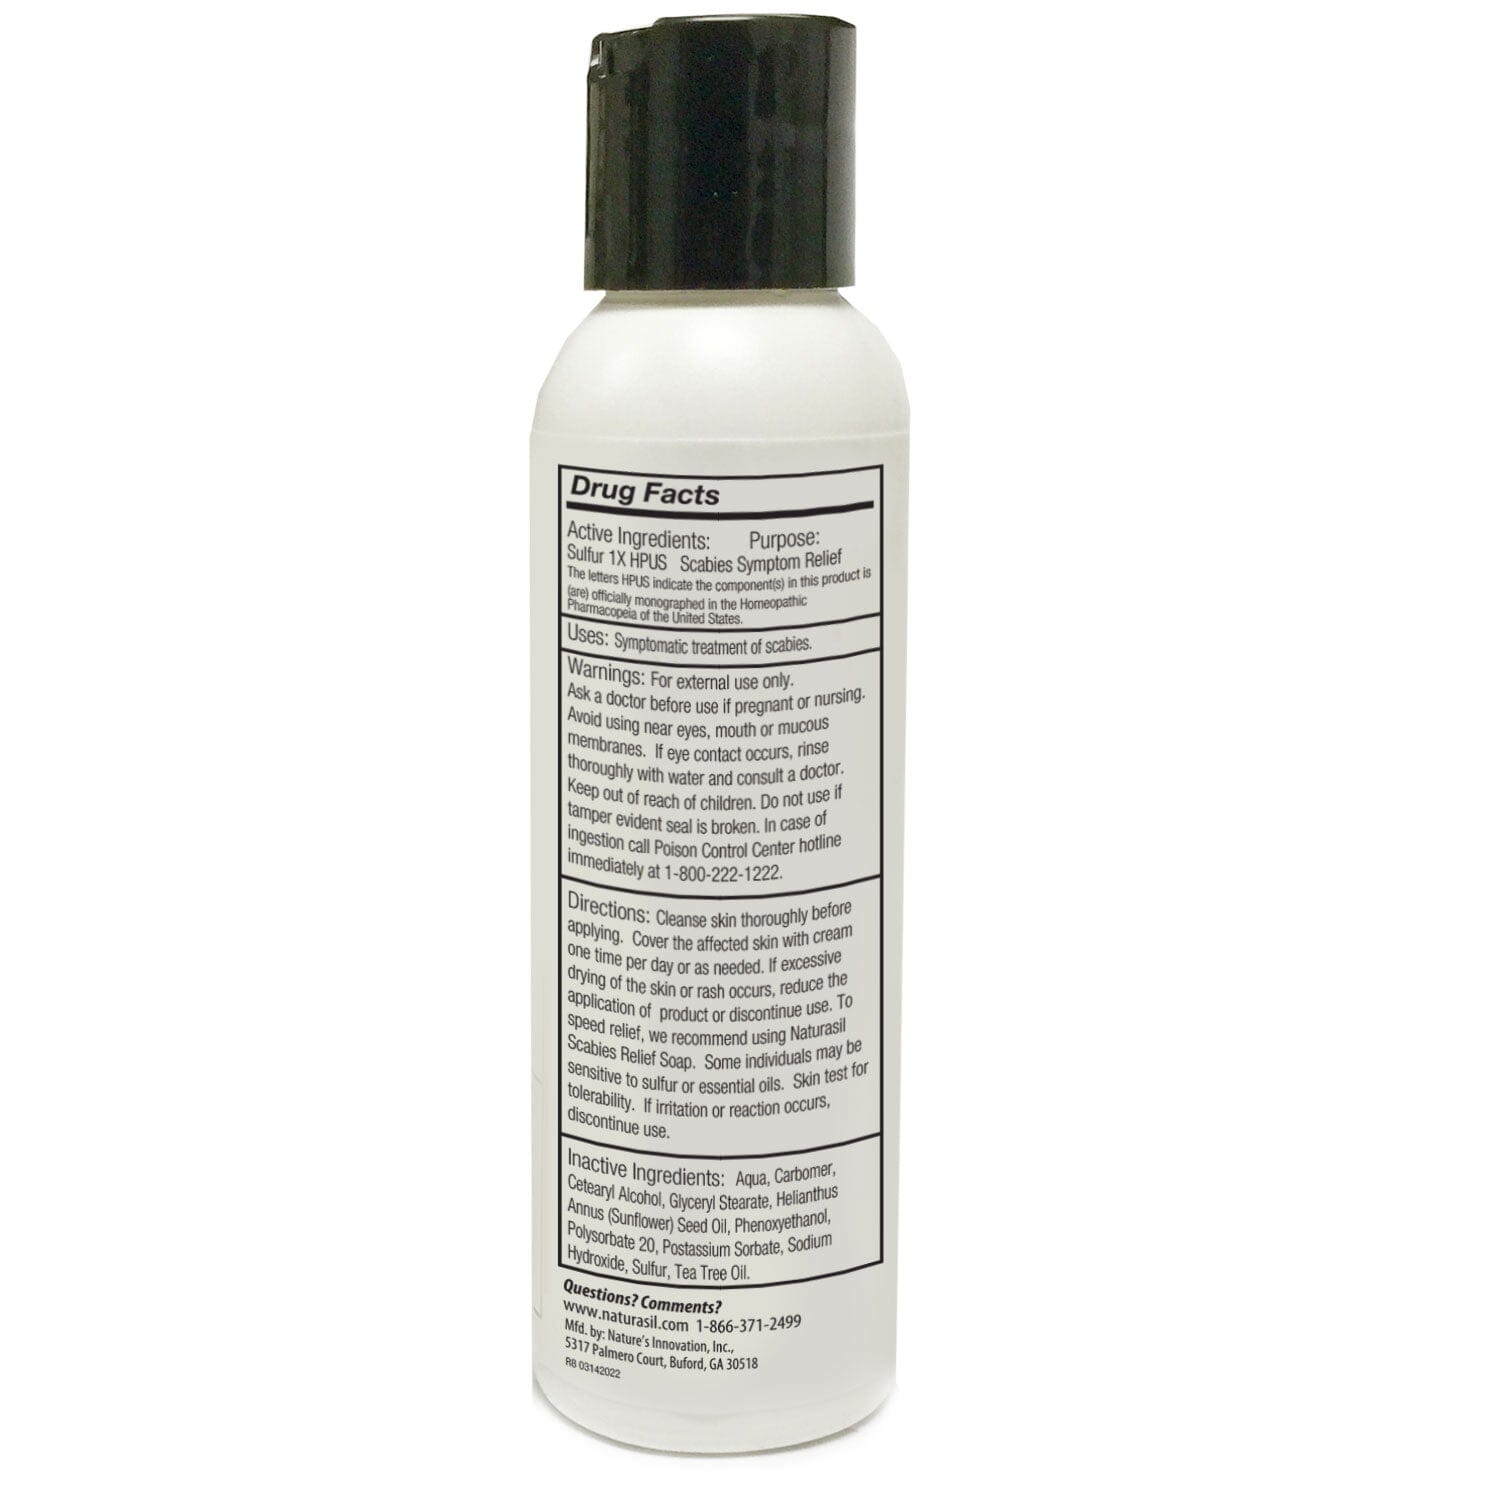 Scabies Treatment Lotion | Buy One, Get One 25% Off | 2 - 4 oz Bottles - Naturasil